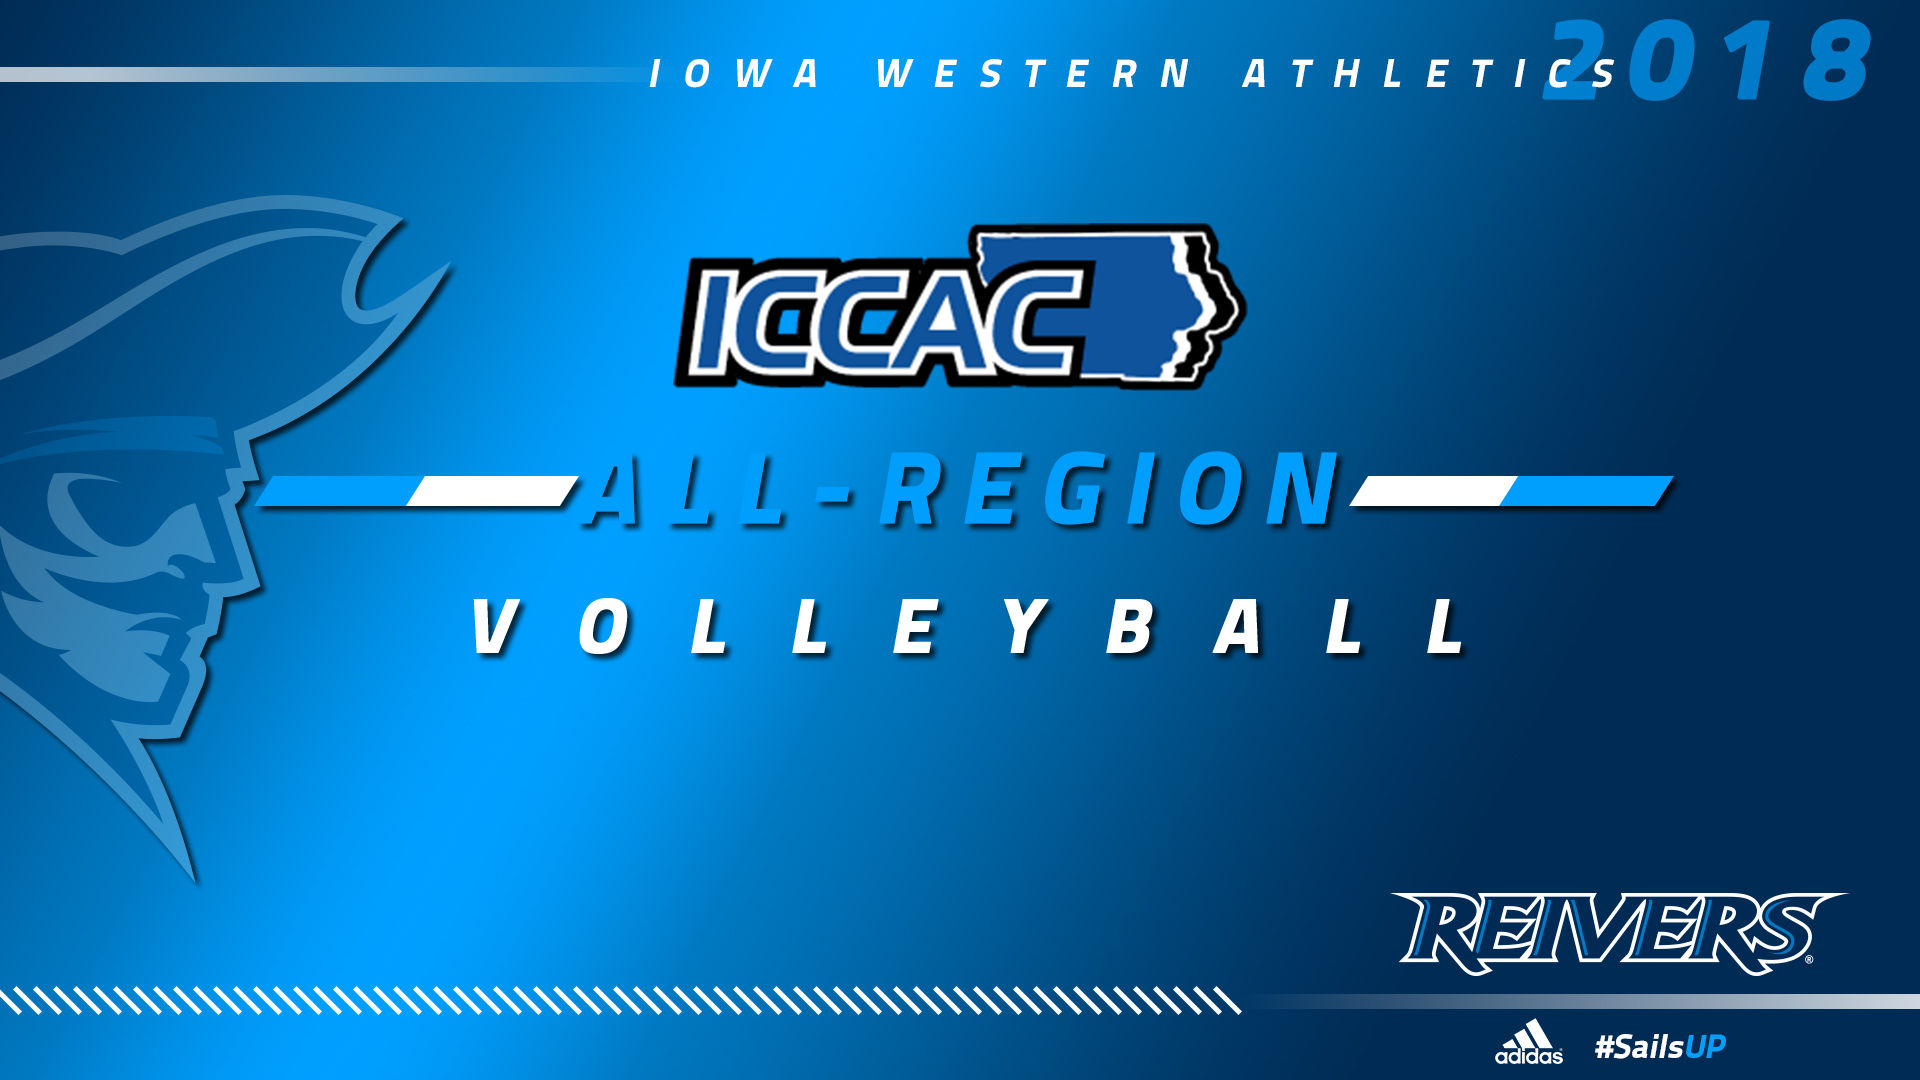 4 Reivers named ICCAC D1 All-Region Team, also snag Coach & Player of the Year honors.